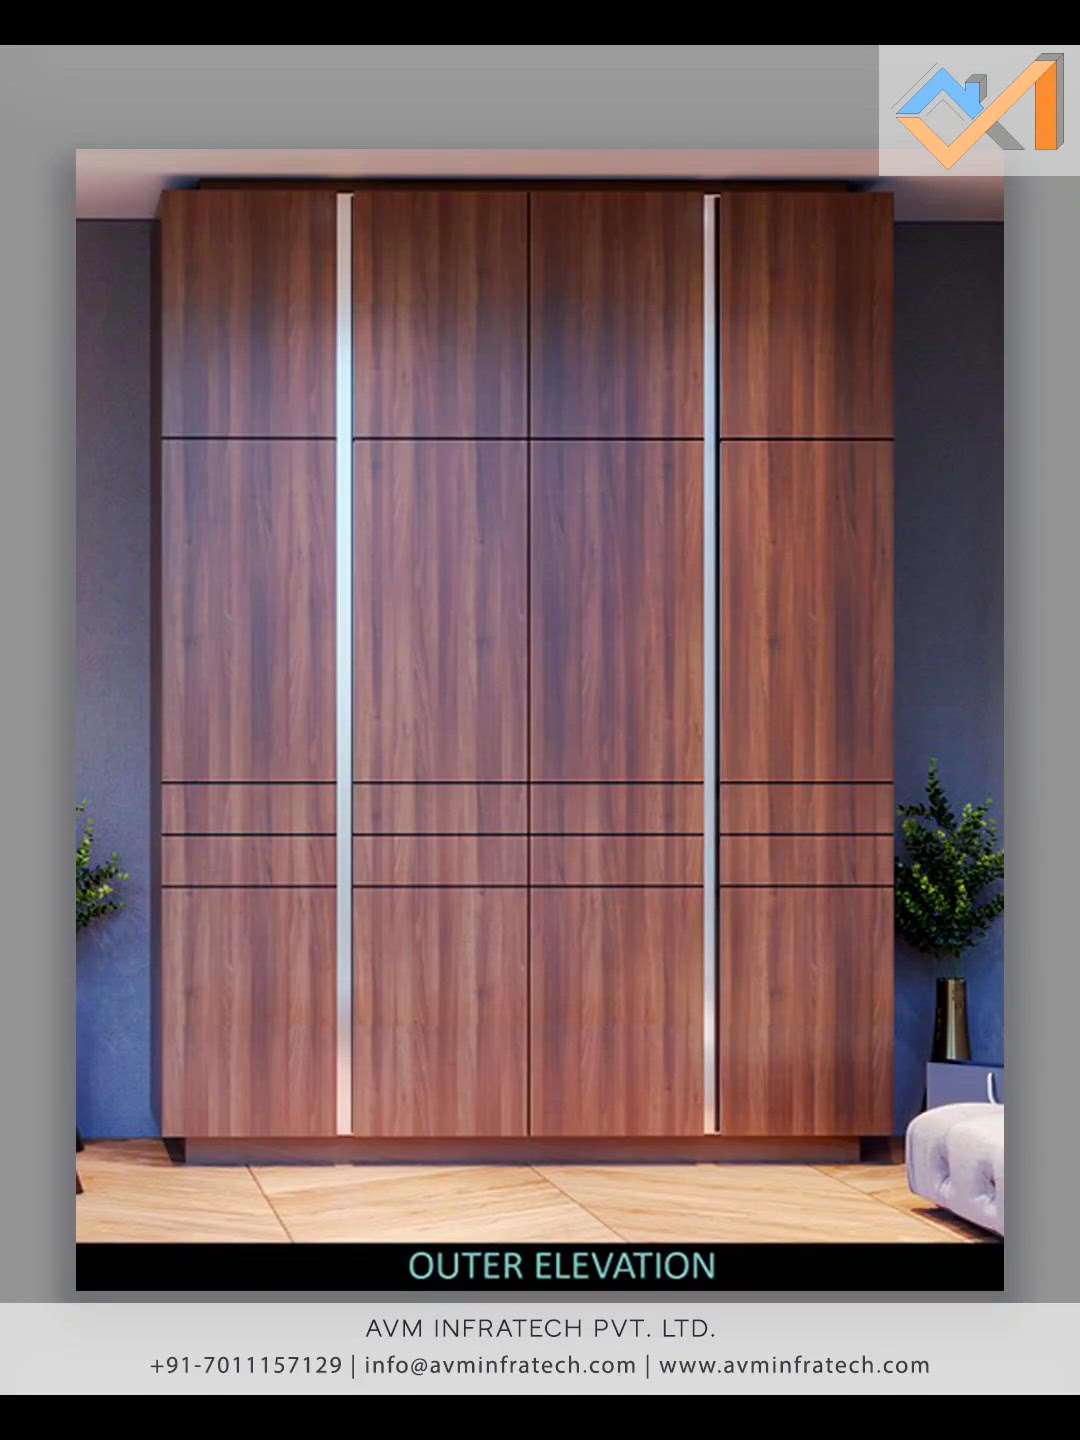 Since veneers are sourced from trees they look like real wood where each sheet of veneer has a unique appearance. Unlike laminates, no two sheets of veneer look alike.


Follow us for more such amazing updates. 
.
.
#wardrobe #wardrobestylist #wardrobedesign #wardrobegoals #handmadewardrobe #wardrobeessentials #wardrobes #wardrobebasics #avminfratech #memadewardrobe #veneer #veneers #wood #woodworking #wooddesign #woodturning #hardwood